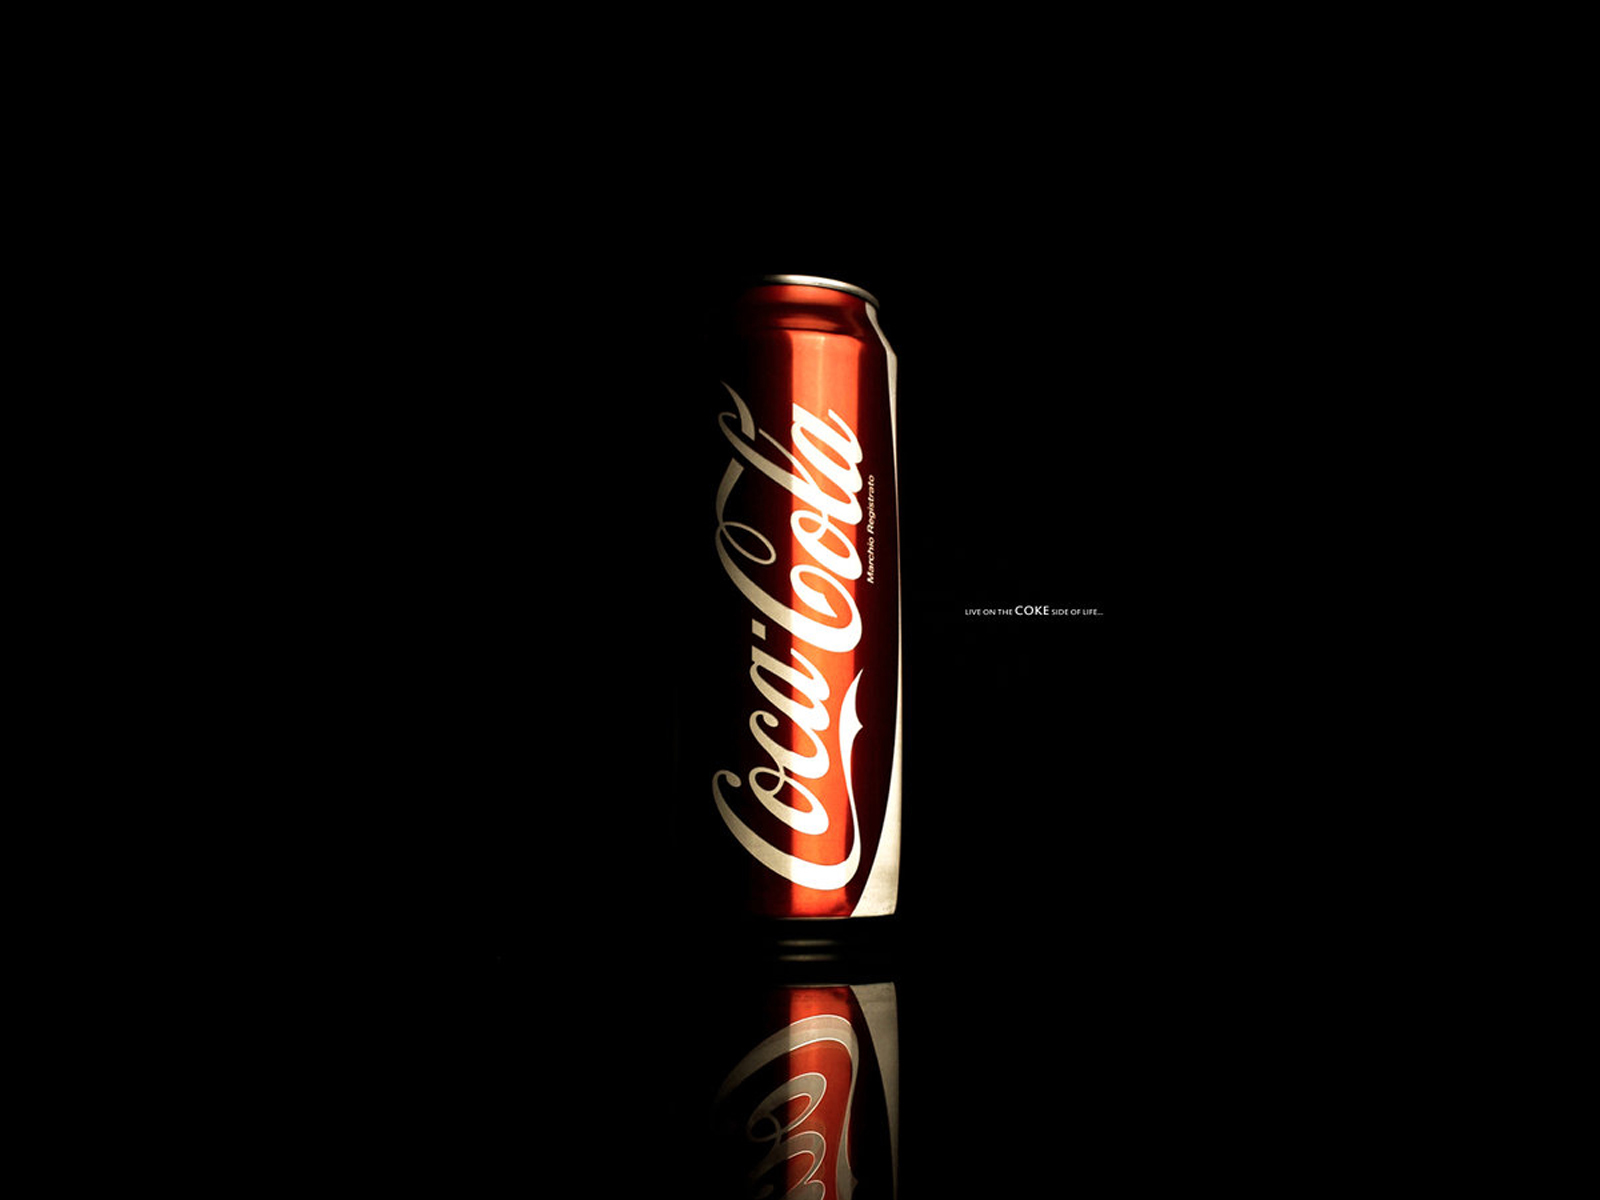 19771 download wallpaper brands, food, coca-cola, drinks, black screensavers and pictures for free